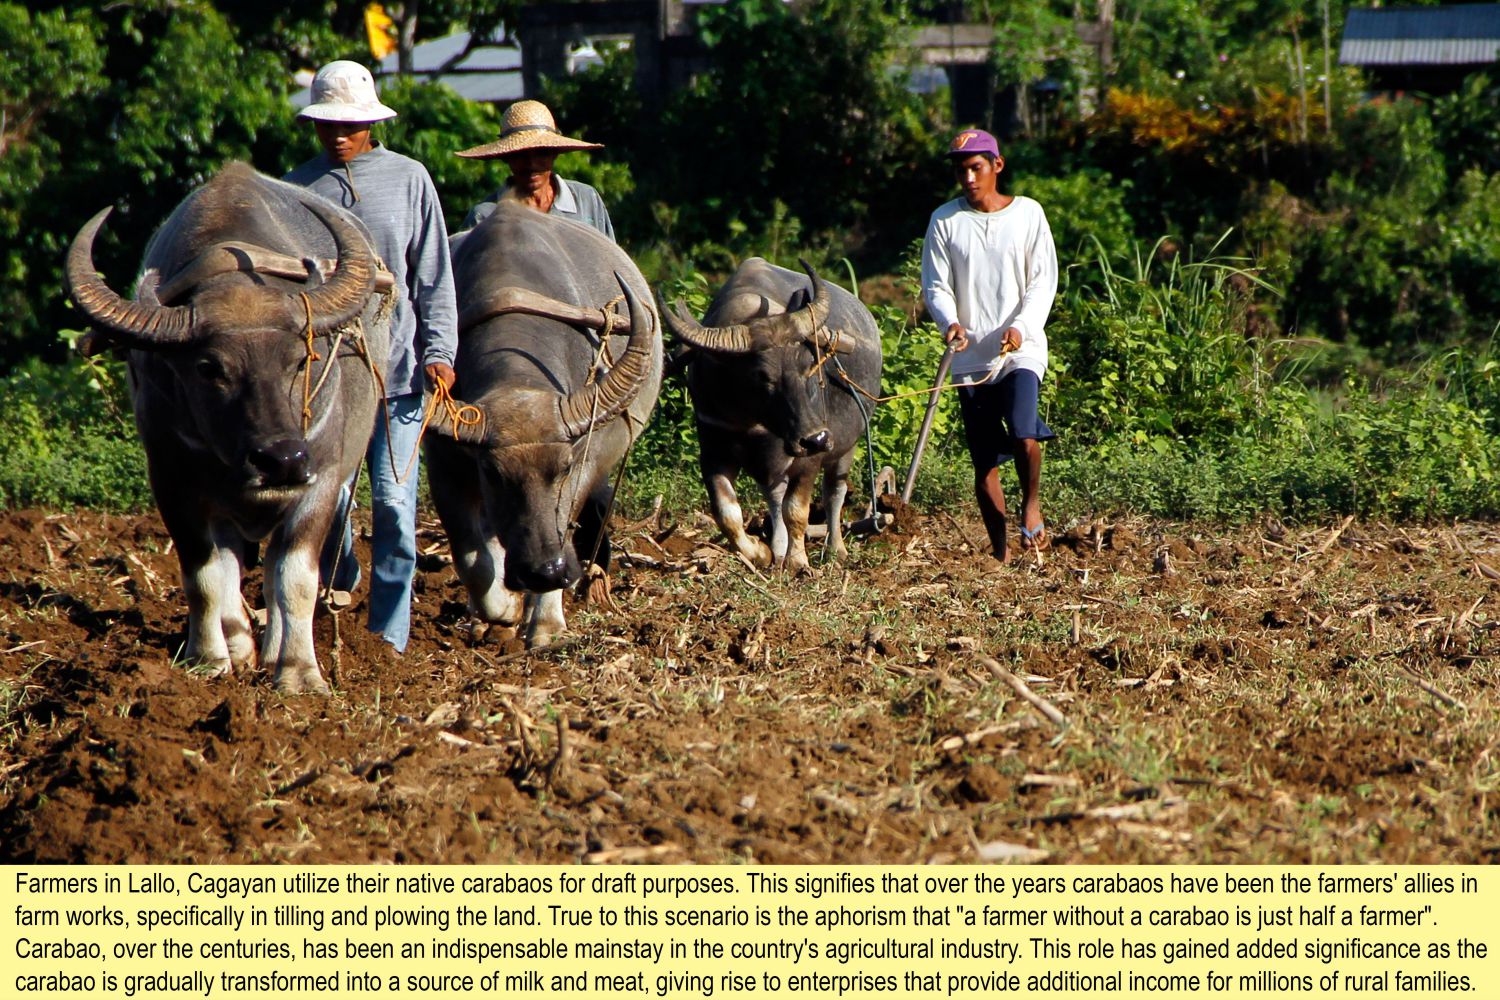 Carabao Rises To New Found Importance As Farmers ‘beast Of Fortune